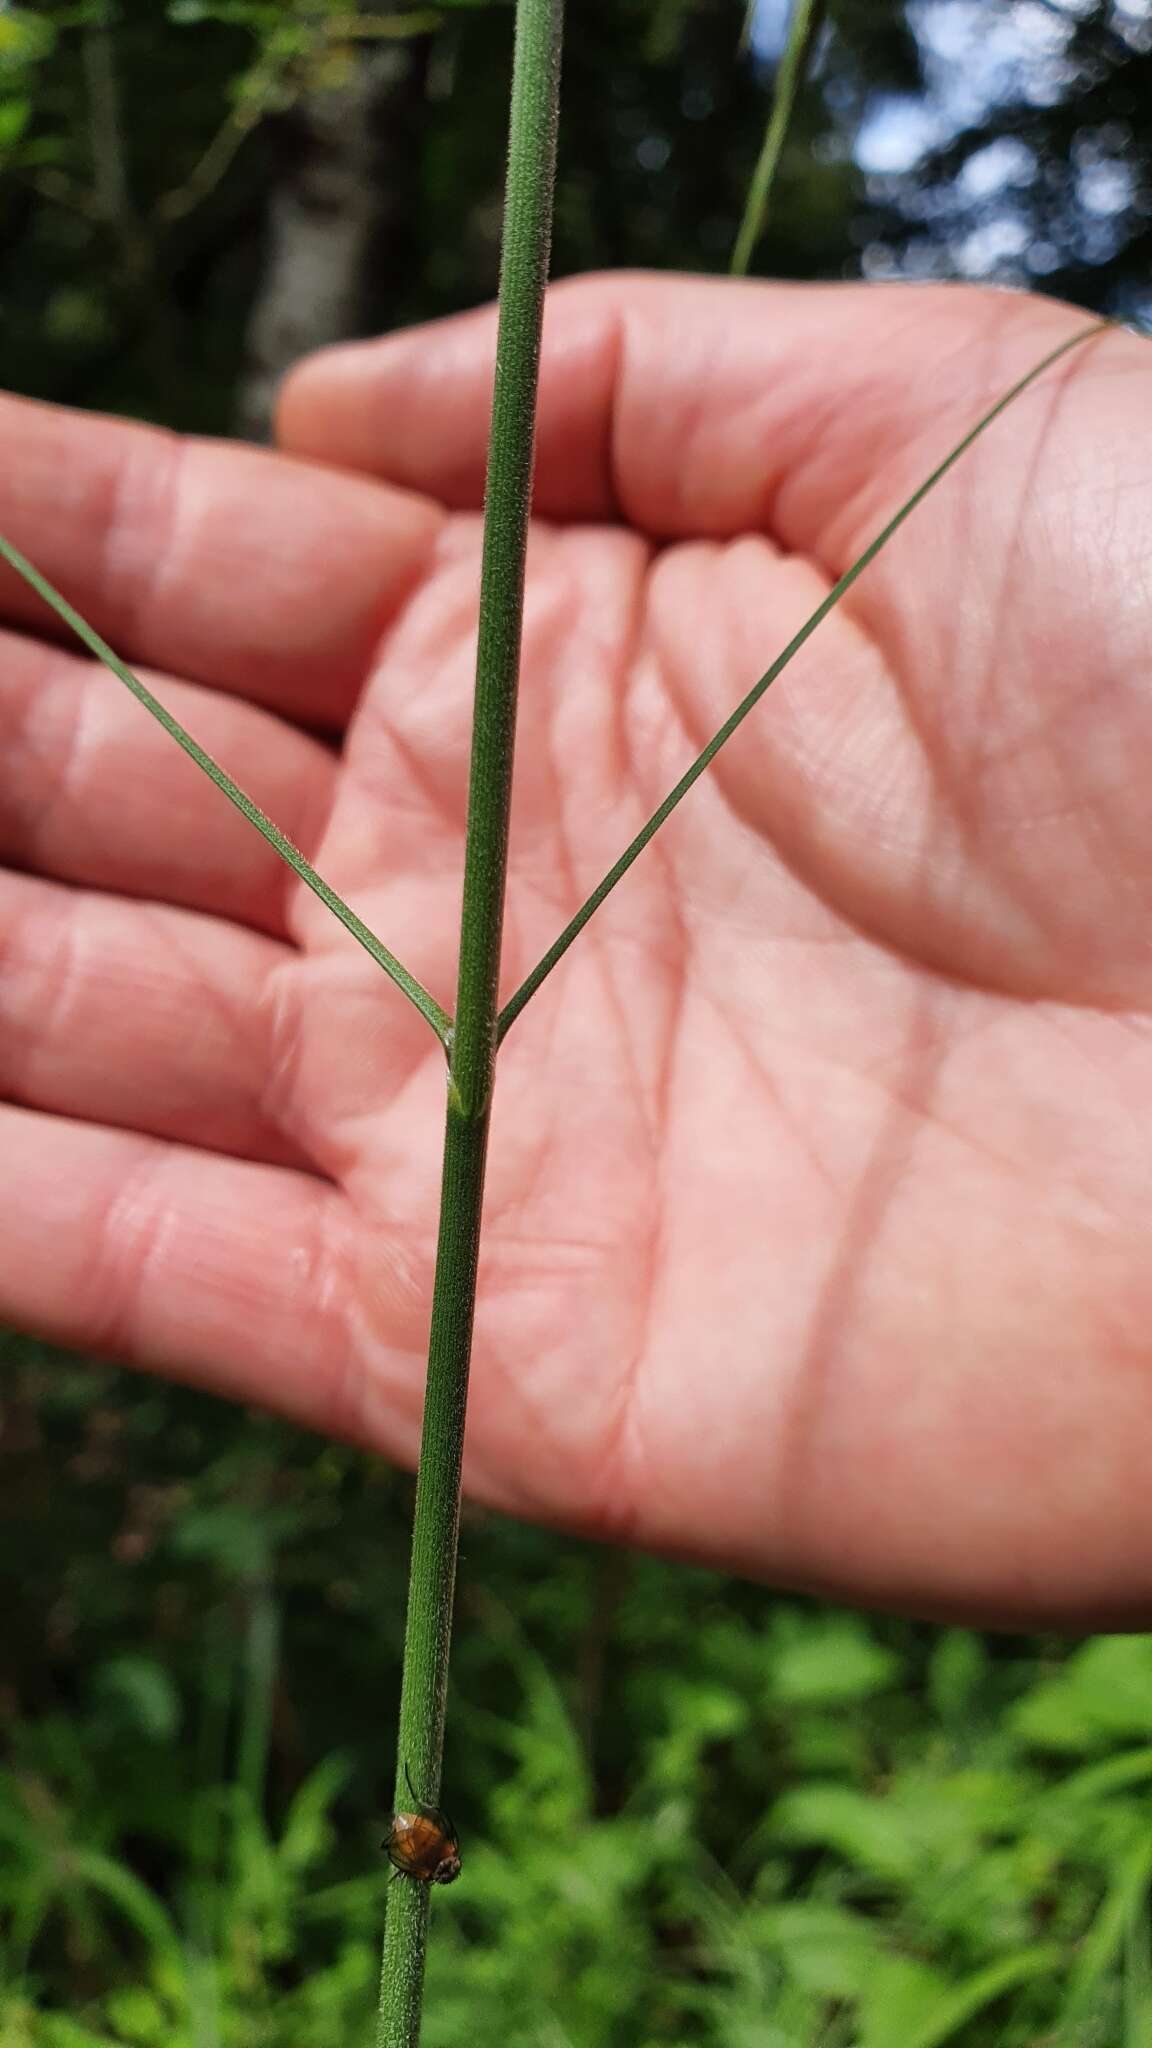 Image of hairy brome